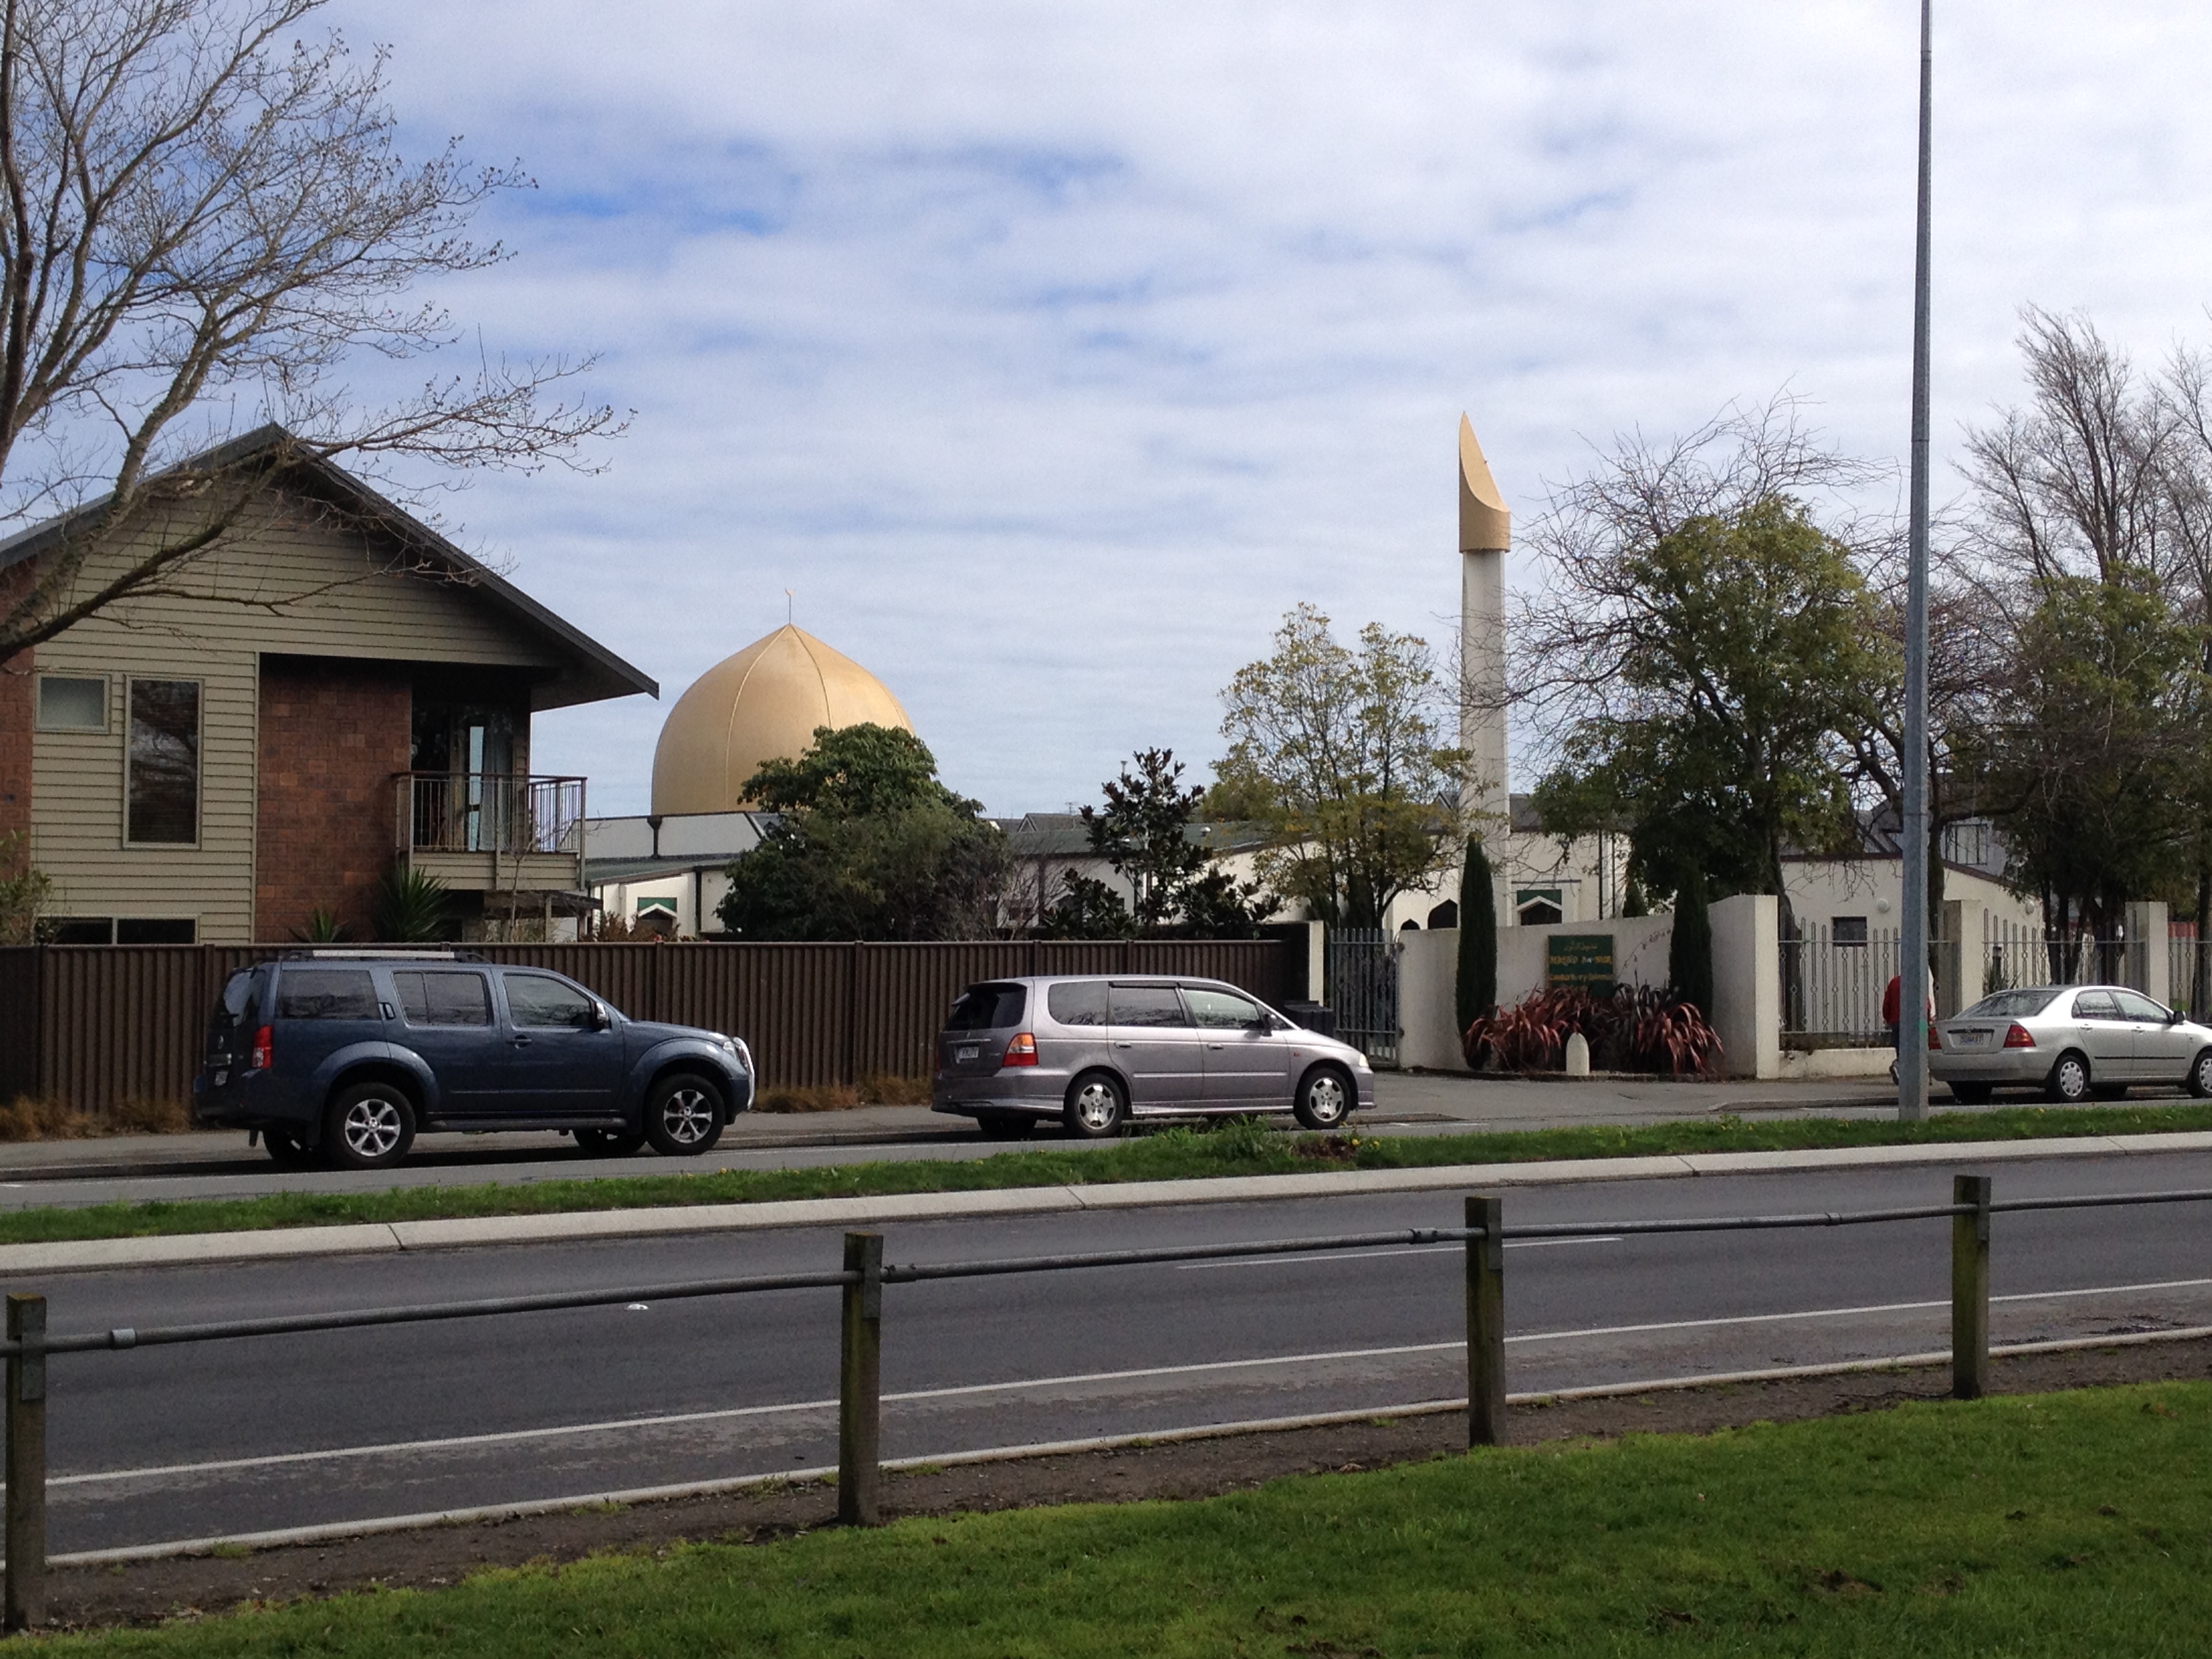 Apology over New Zealand mosque accused's 'hateful' letter